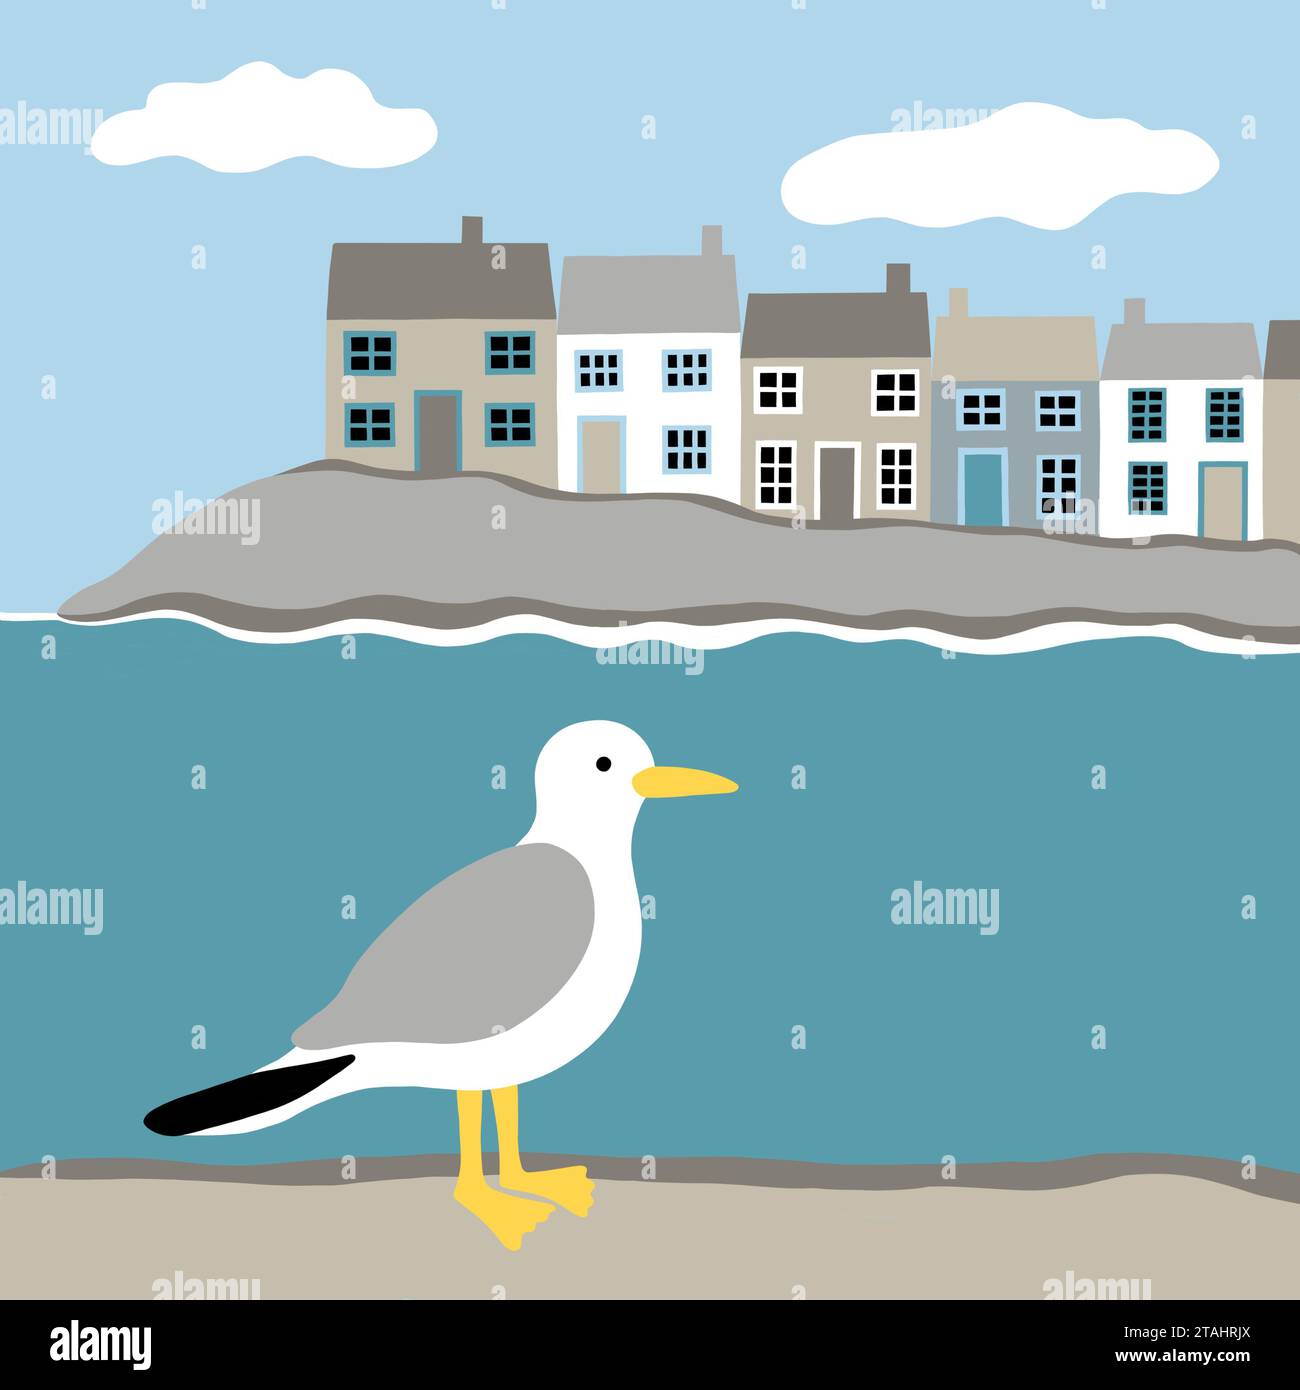 https://c8.alamy.com/comp/2TAHRJX/seagull-on-a-harbour-wall-with-a-terrace-of-seaside-cottages-in-the-background-a-coastal-scene-in-a-cartoon-style-with-a-soft-muted-colour-palette-2TAHRJX.jpg